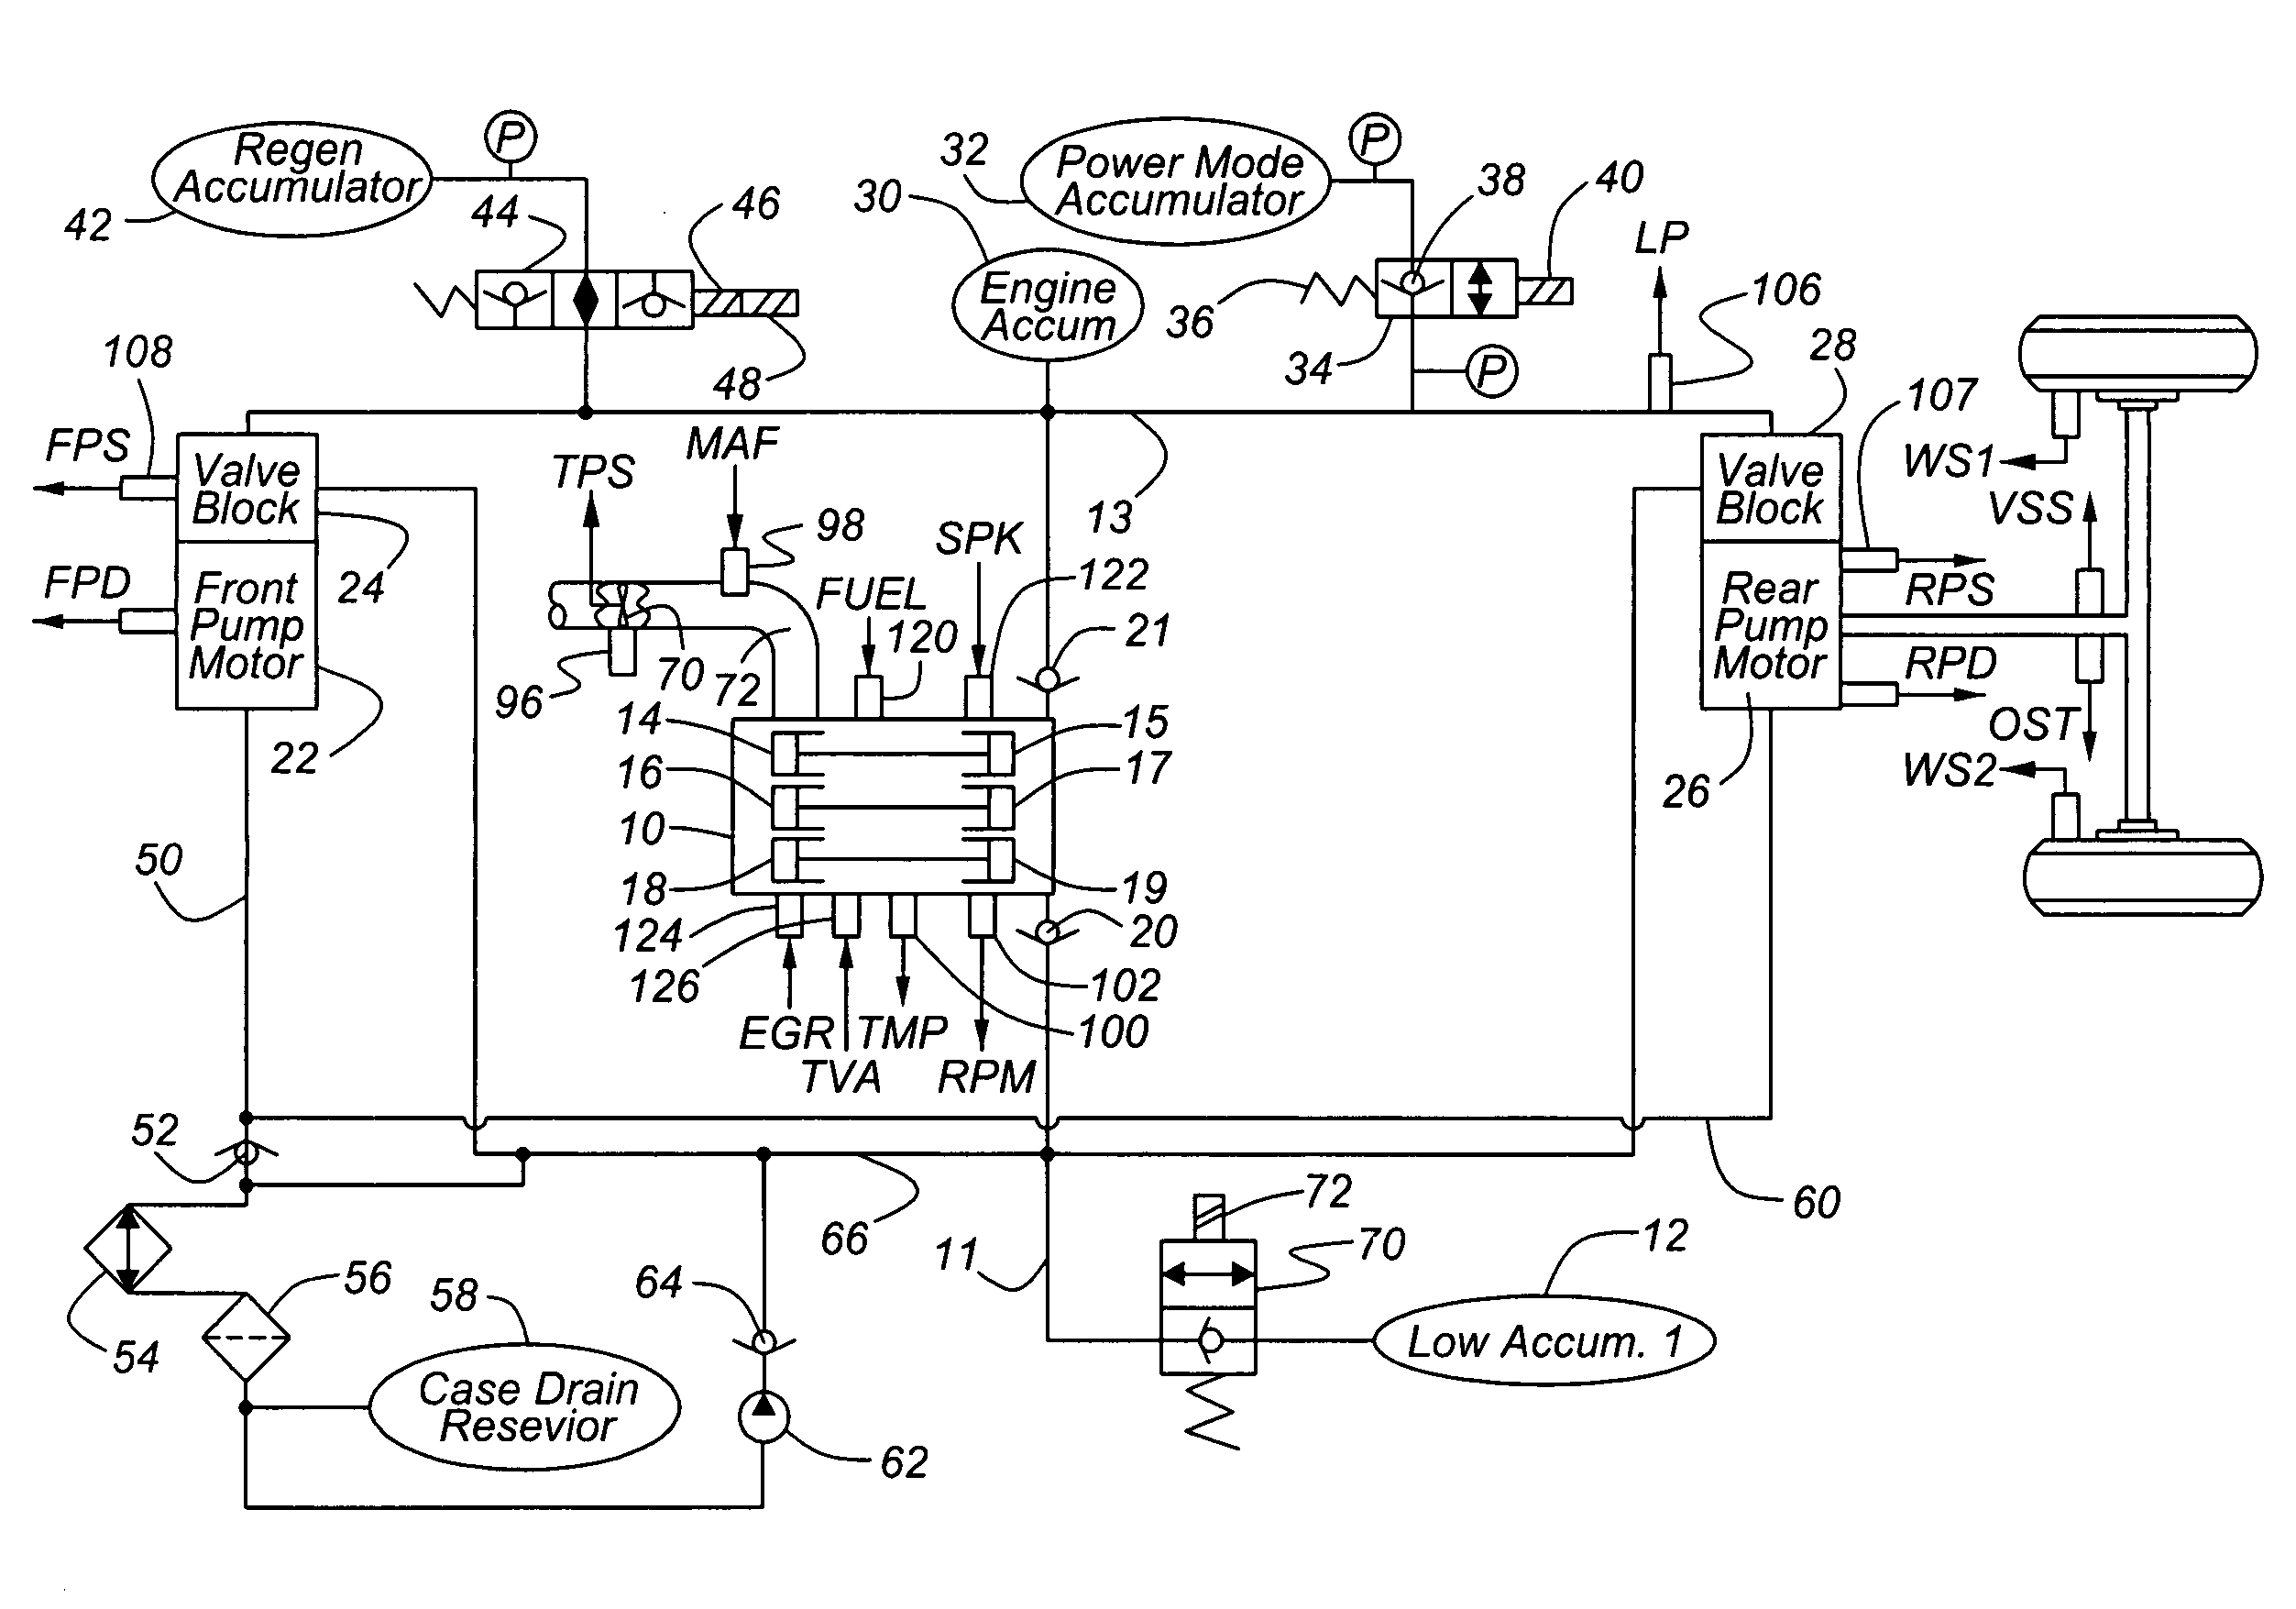 Engine control based on flow rate and pressure for hydraulic hybrid vehicle